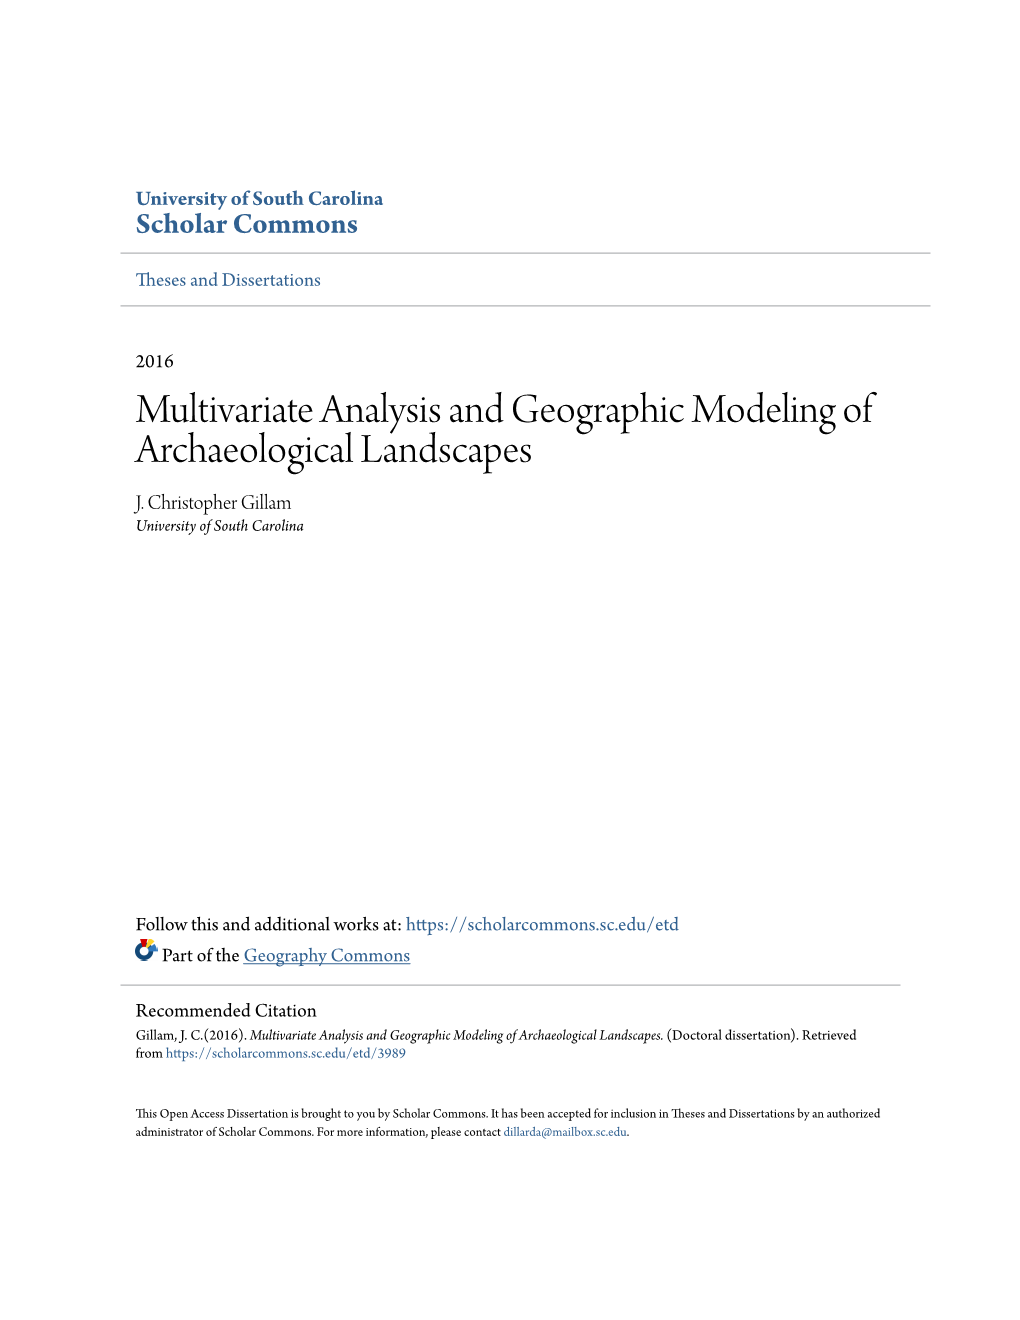 Multivariate Analysis and Geographic Modeling of Archaeological Landscapes J